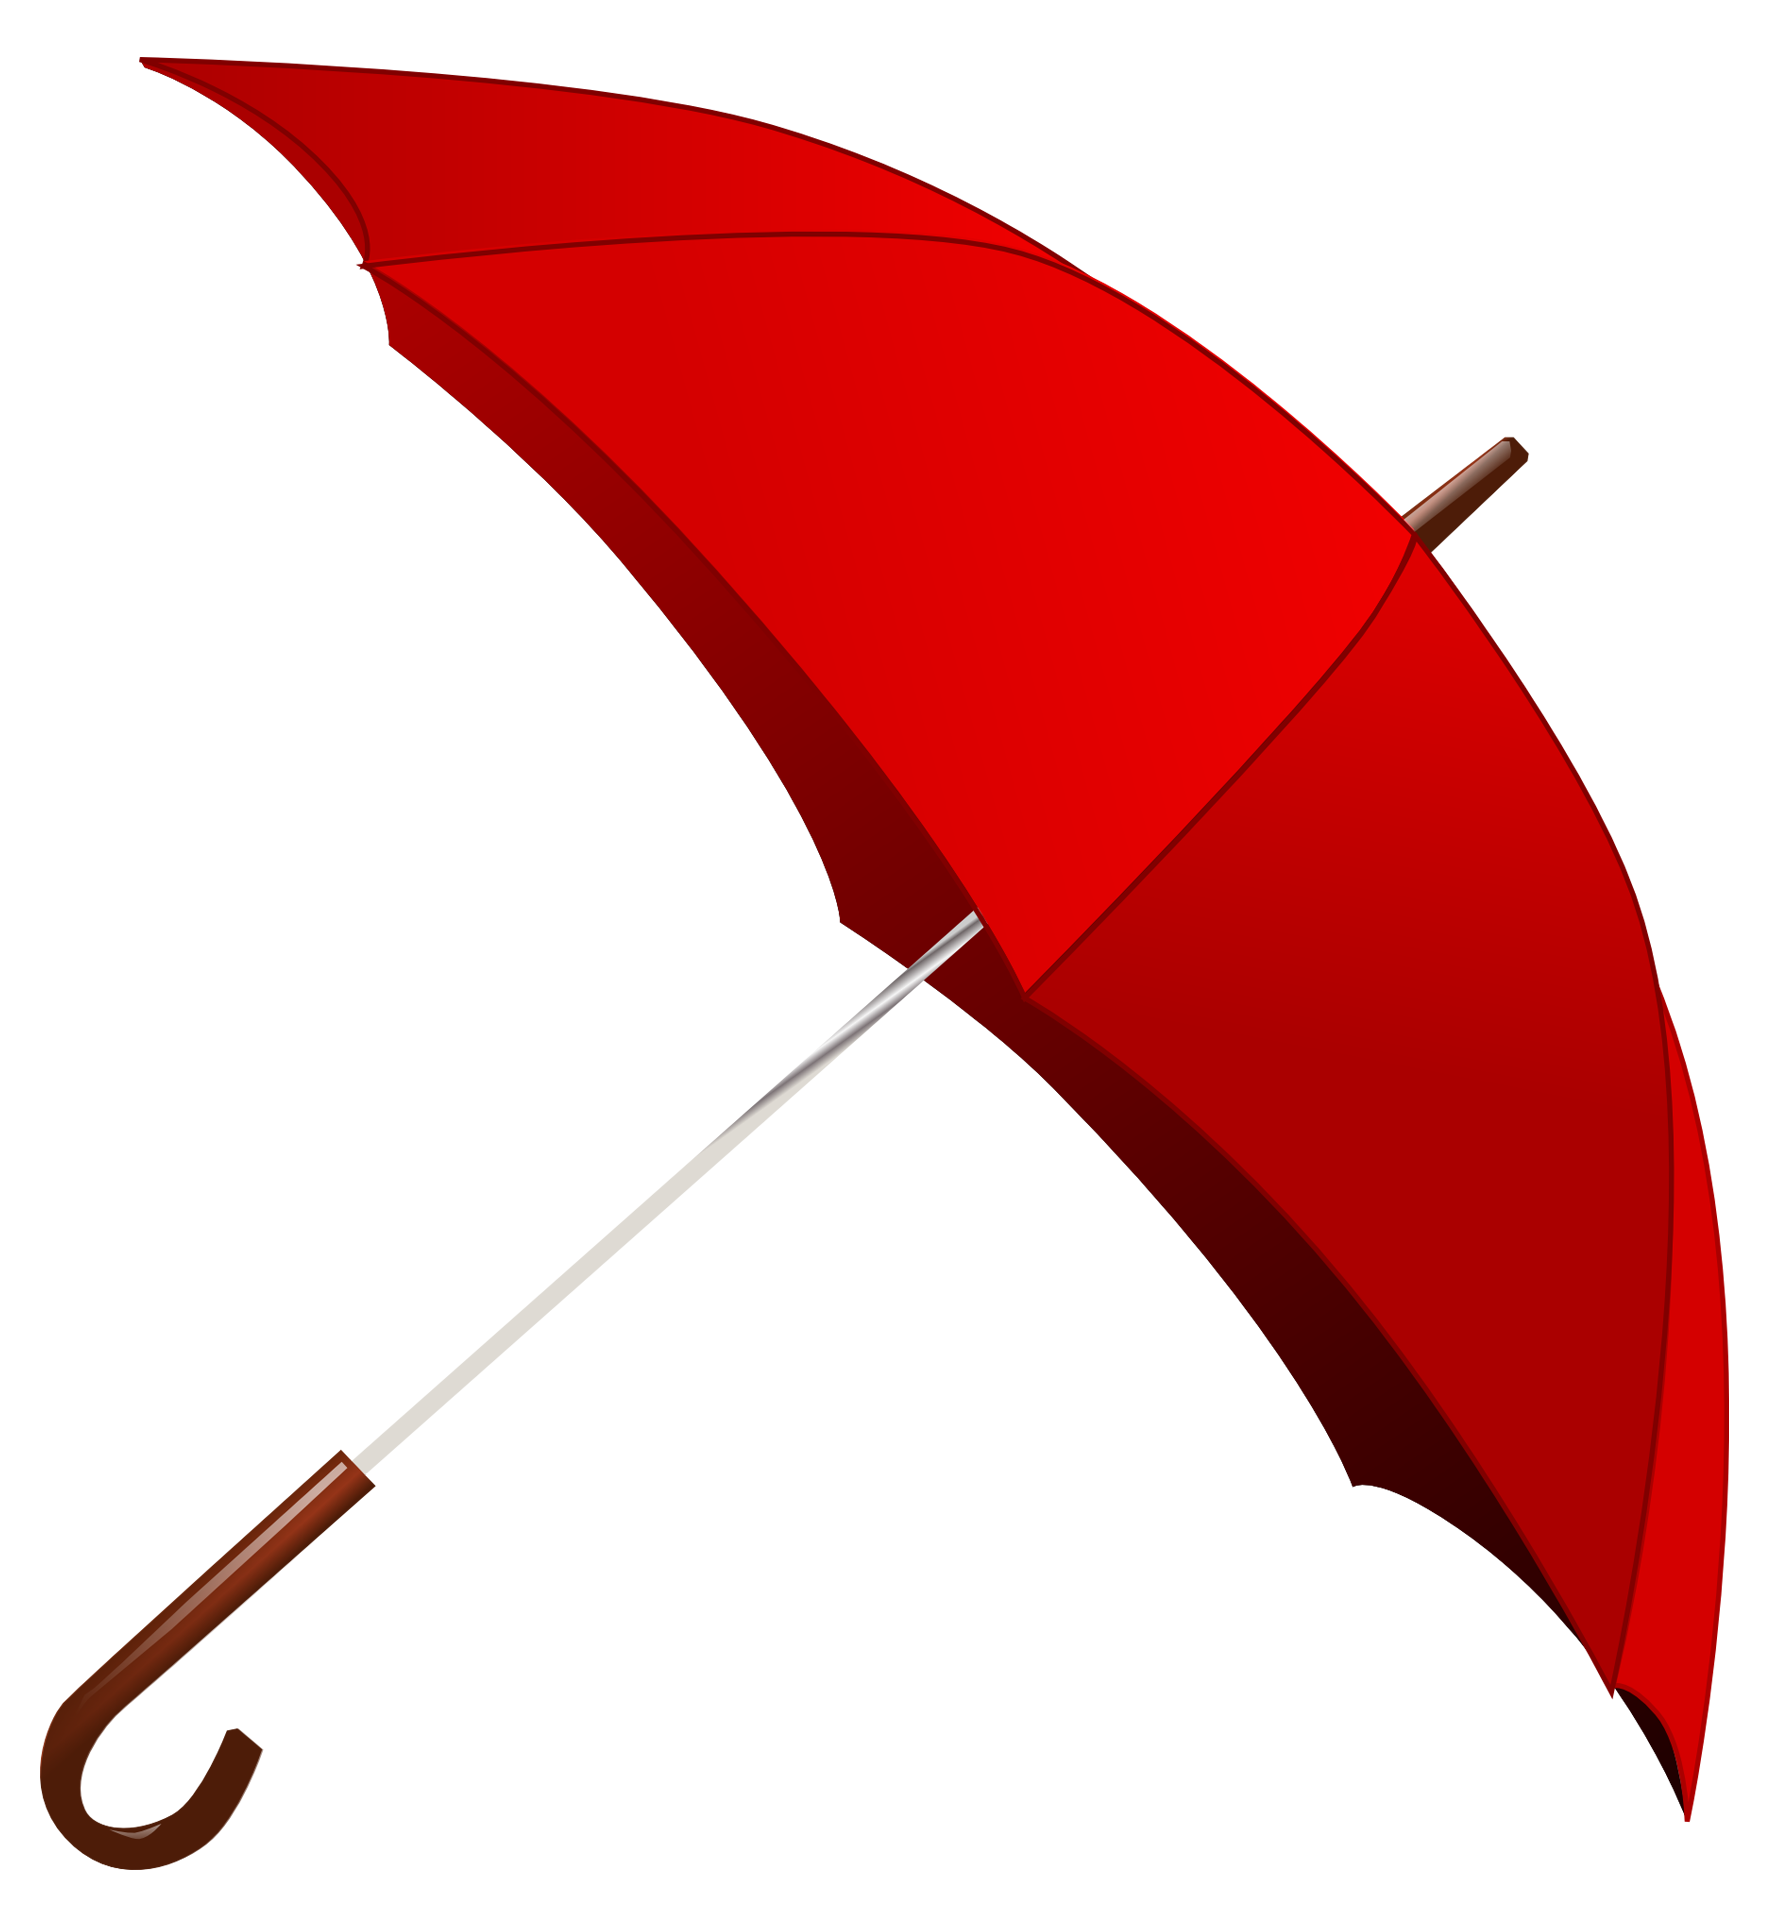 A Red Umbrella With A Wooden Handle